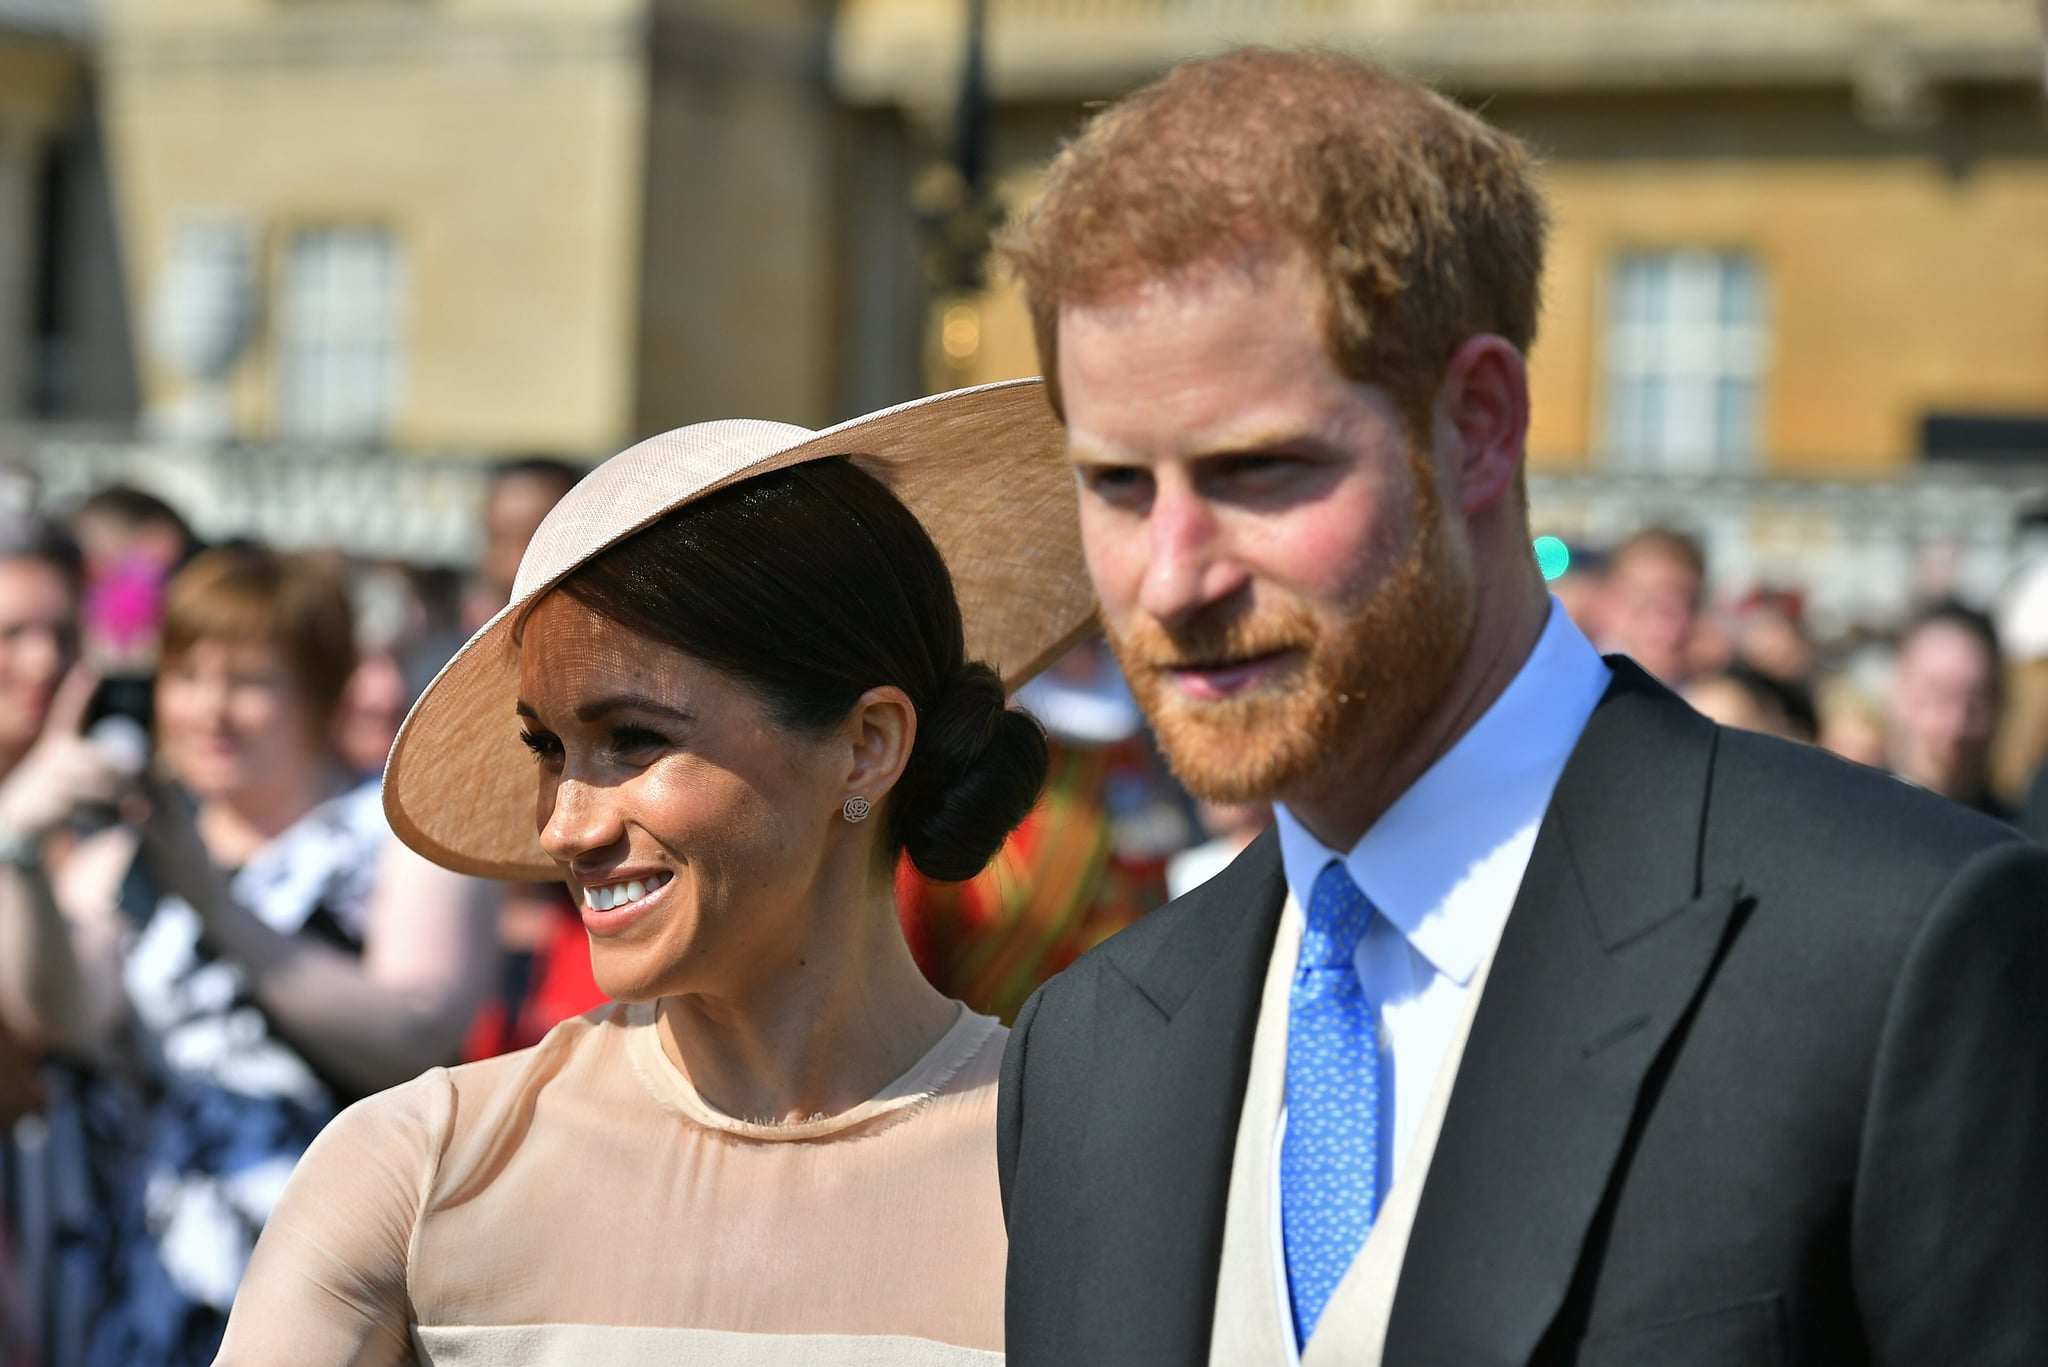 Meghan Markle's royal wedding day jewelry explained